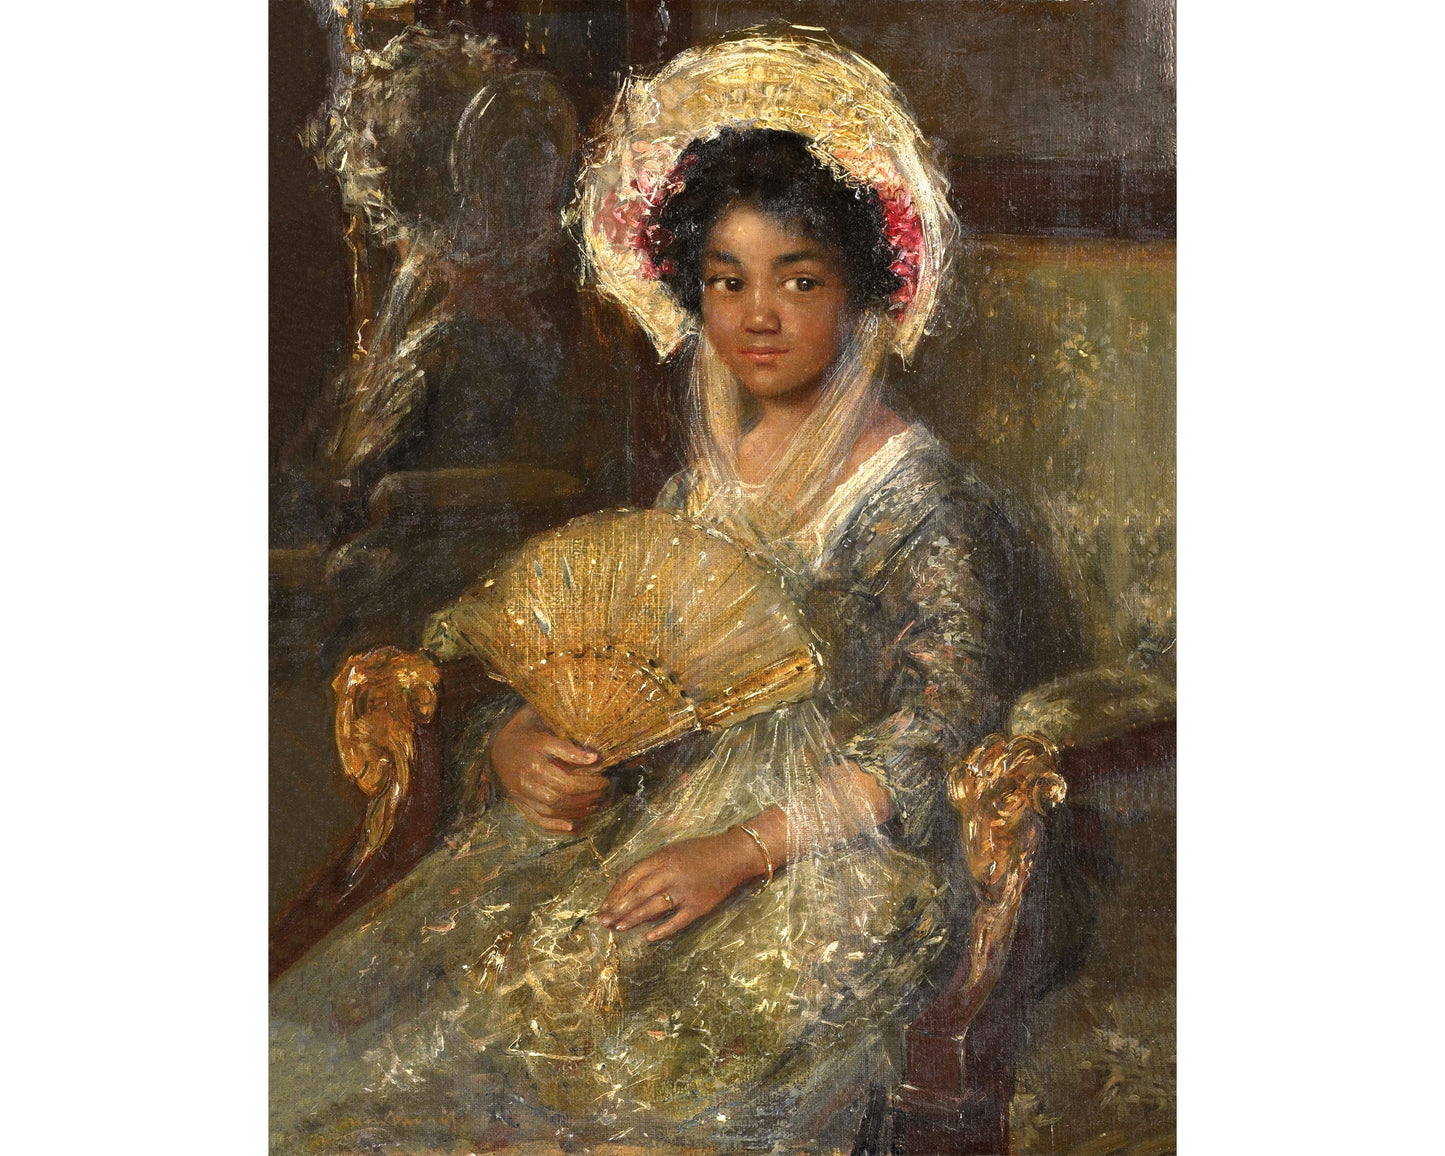 Victorian girl portrait | Young Woman with a Fan |  African American wall art | Vintage painting of a Black child | Simon Maris